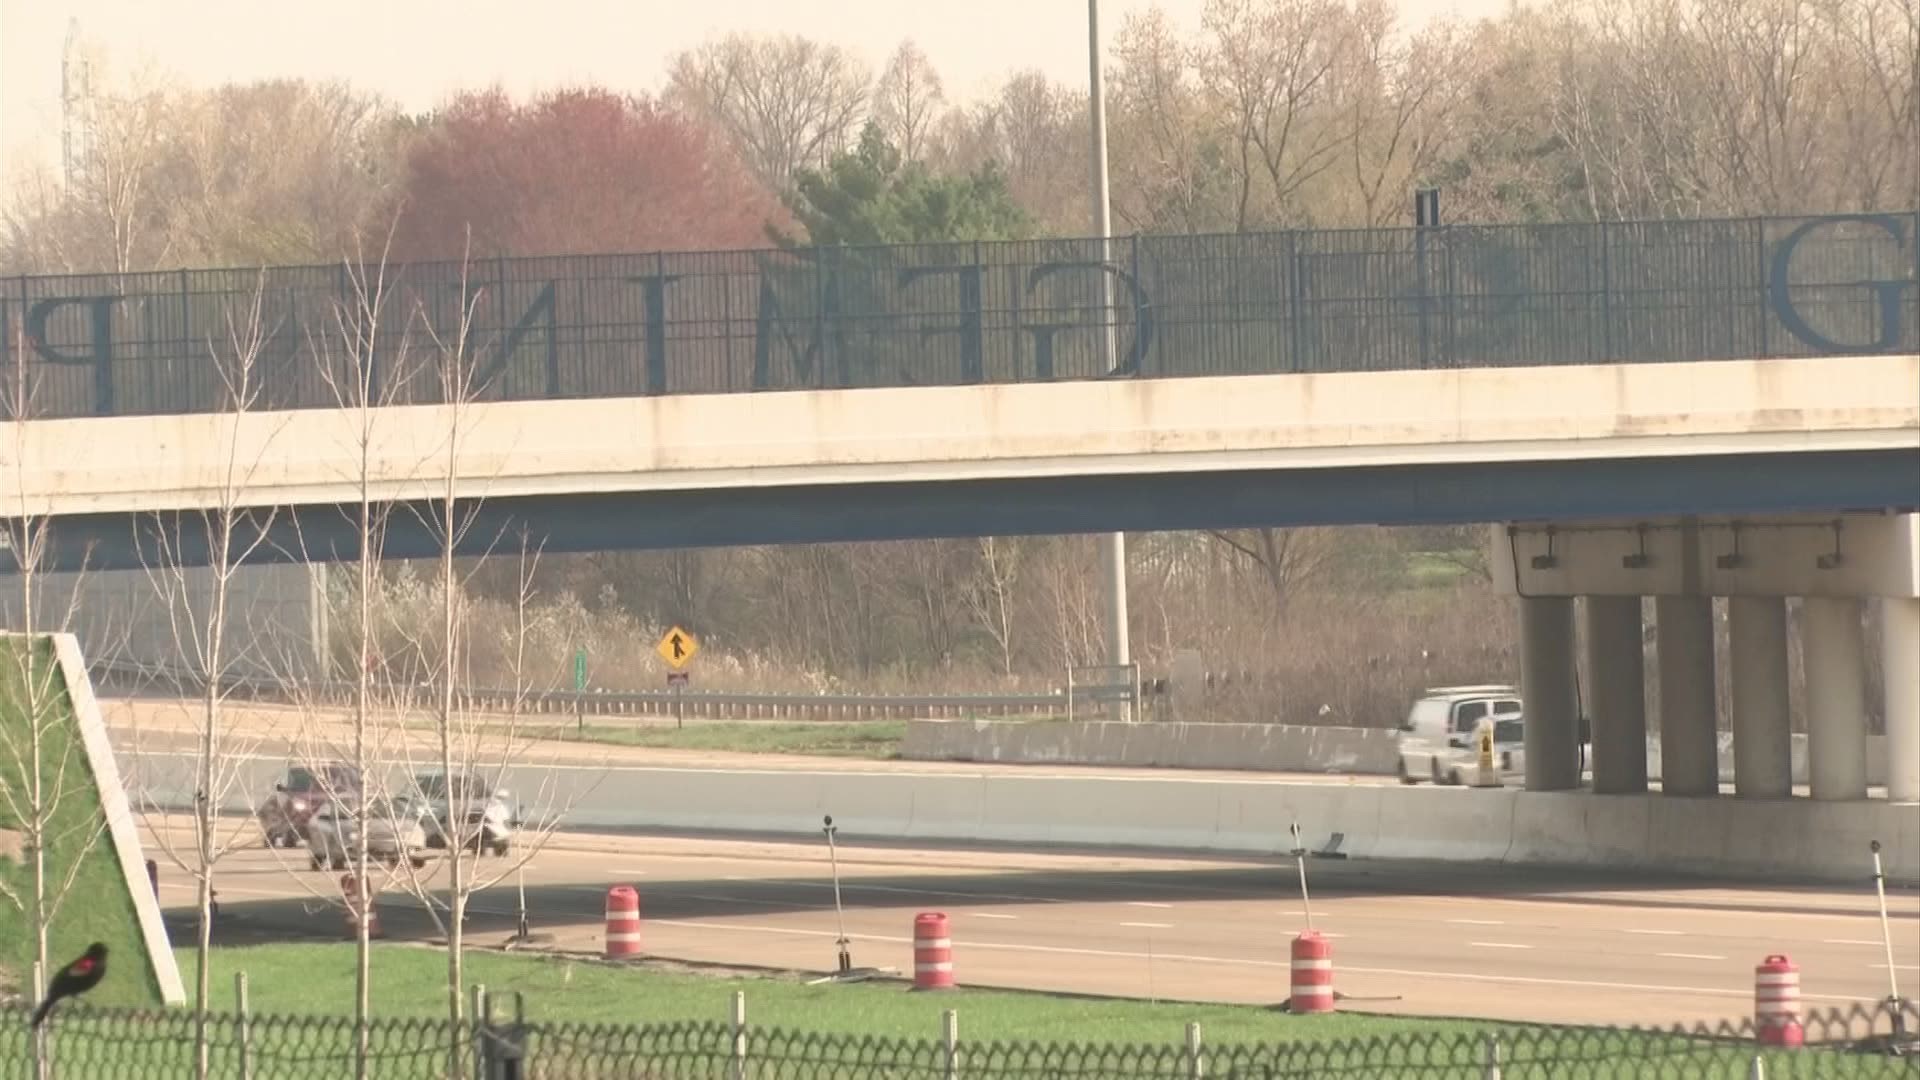 ODOT has announced a $6 million project to widen a portion of I-71 South.